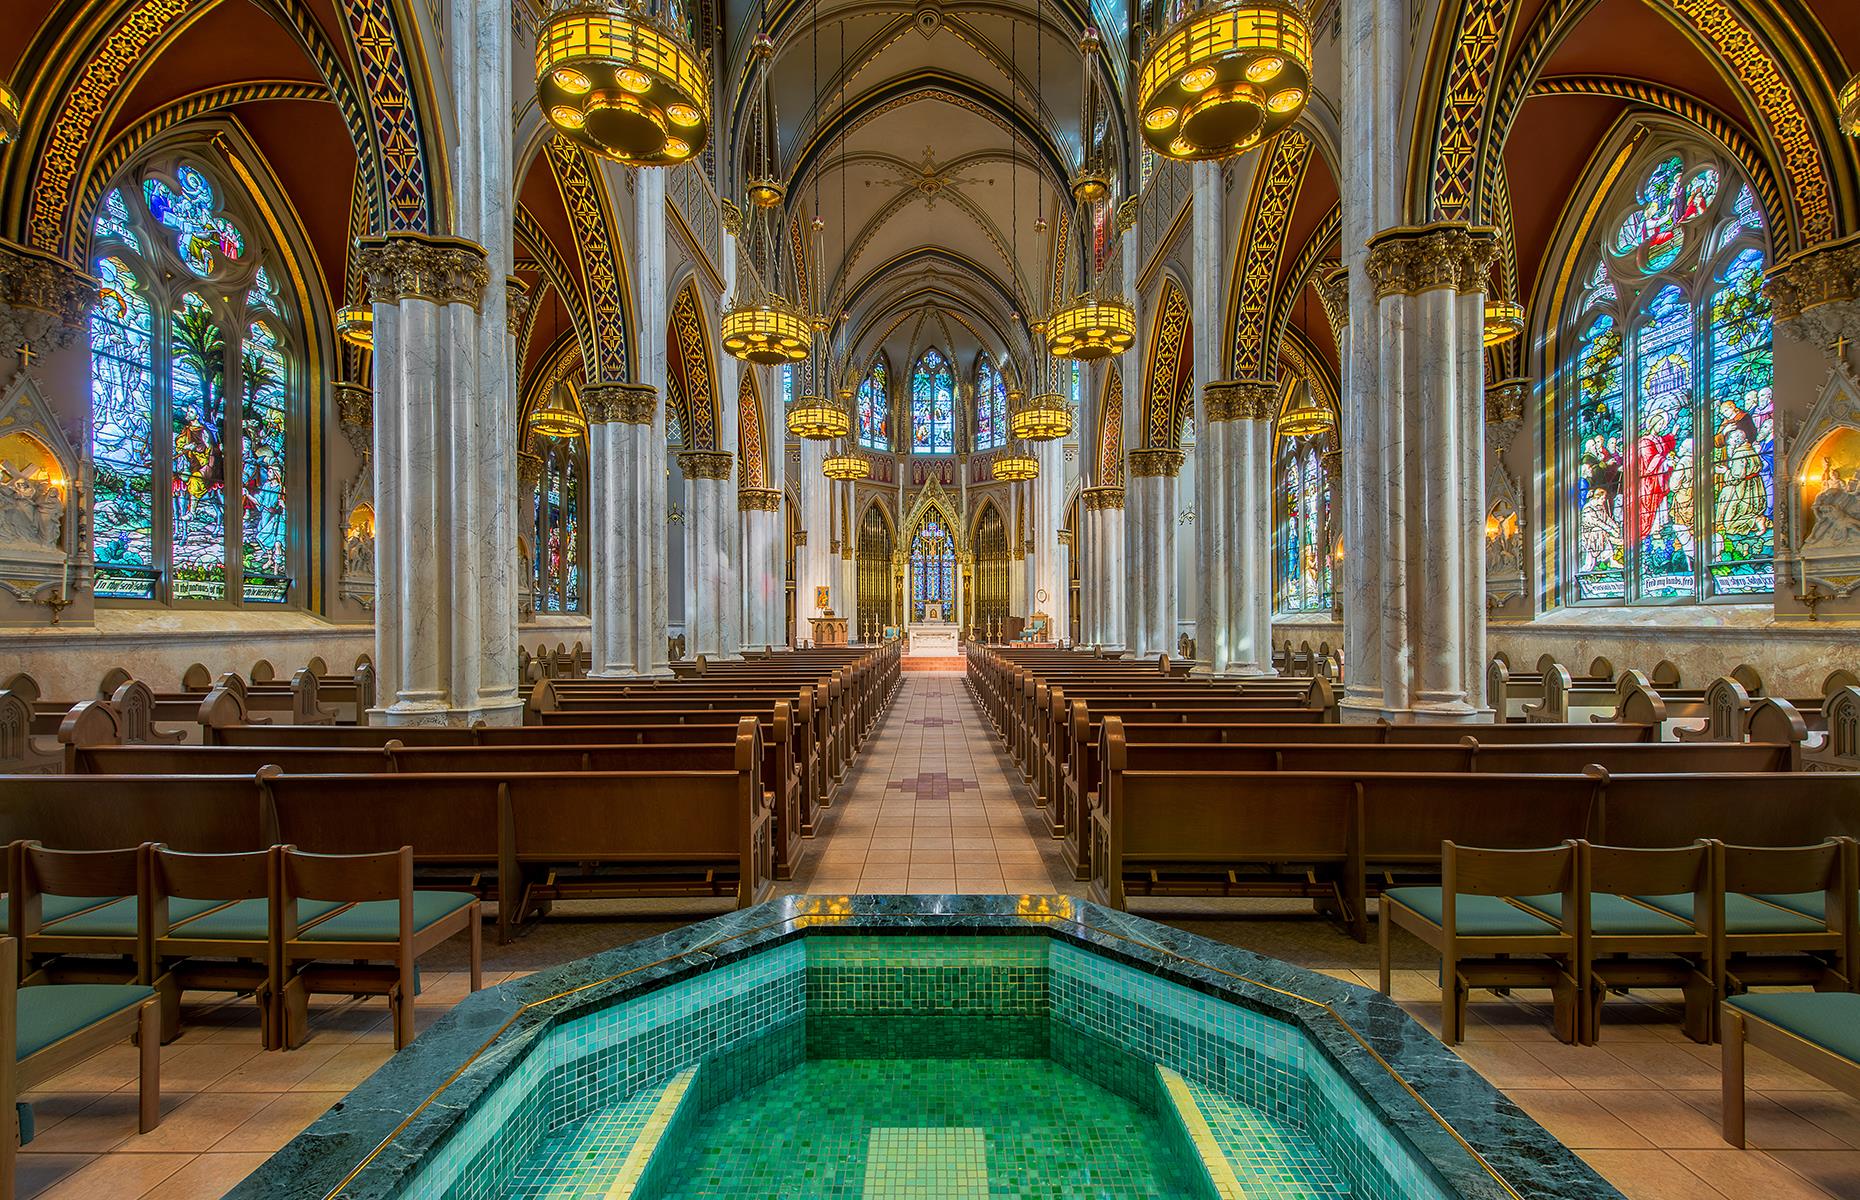 A beautiful example of Neo-Gothic architecture, the Cathedral of St Helena sits on a hill overlooking the city and the surrounding Rocky Mountains. Made of stone with two bell towers, the church was finished in 1914. Its interior is particularly impressive with lots of intricate gold detailing and vibrant stained-glass windows. The baptismal font (in the foreground of this image) adds a lovely splash of color.